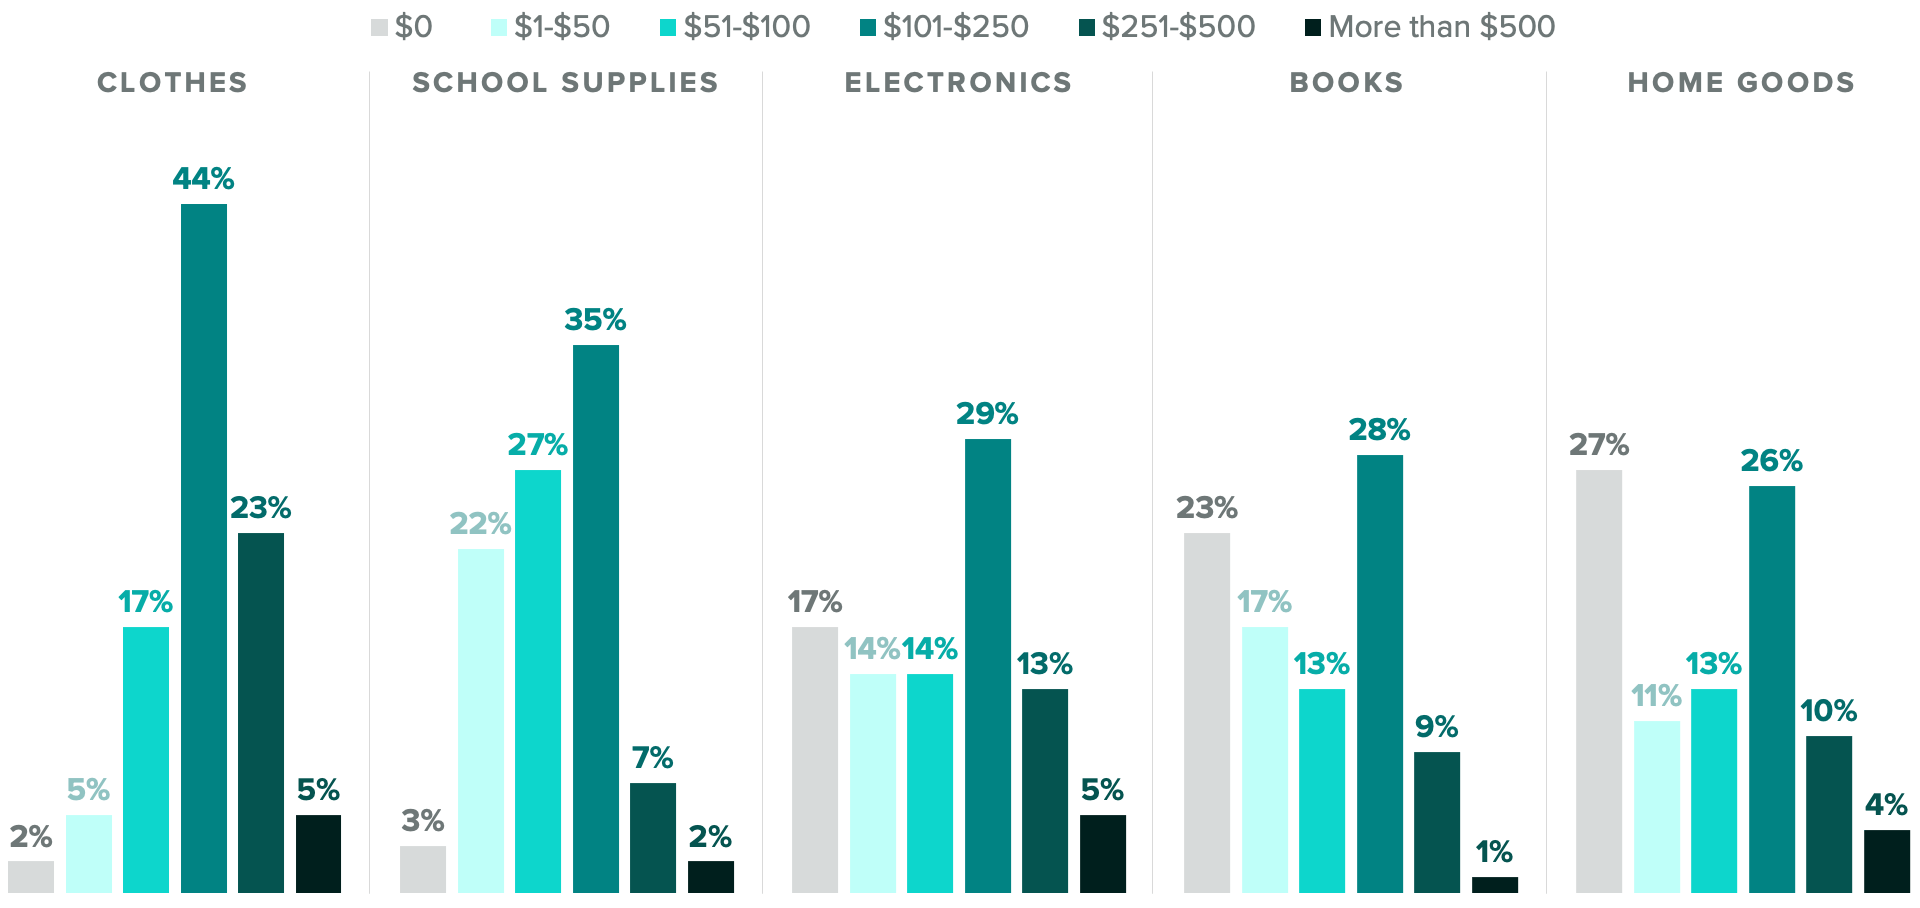 Clustered bar chart of the share of parents who said they plan to spend these amounts in each category. The chart shows clothing and school supplies dominate back-to-school budget.